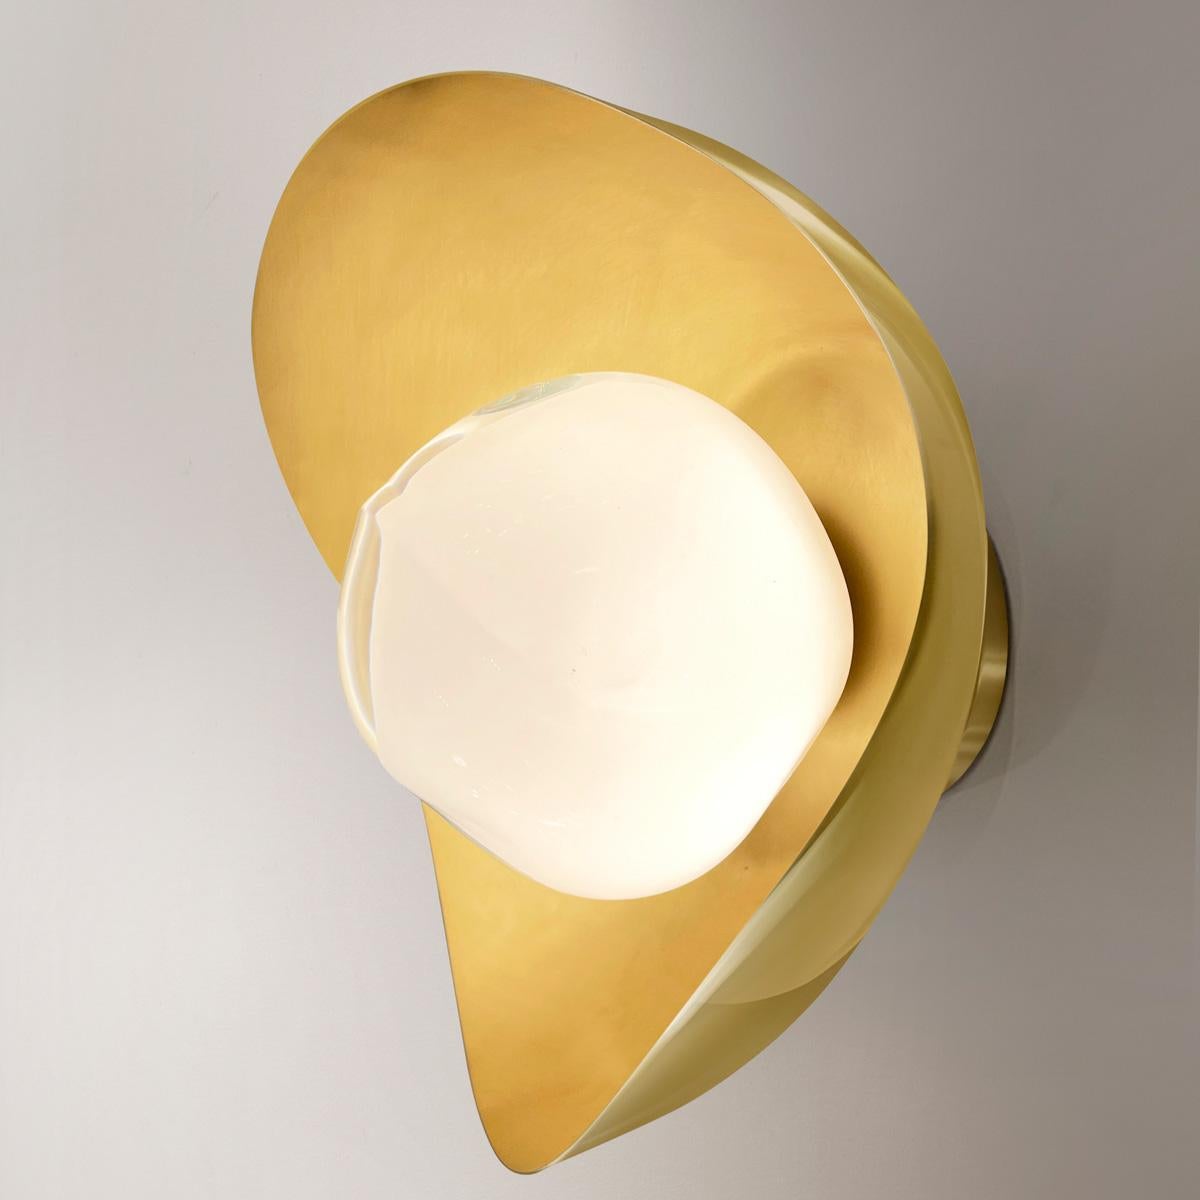 The Perla wall light features an organic brass shell nestling our Sfera glass handblown in Tuscany. The first images show the fixture with a satin brass interior and polished brass exterior finish-subsequent pictures show it in a selection of